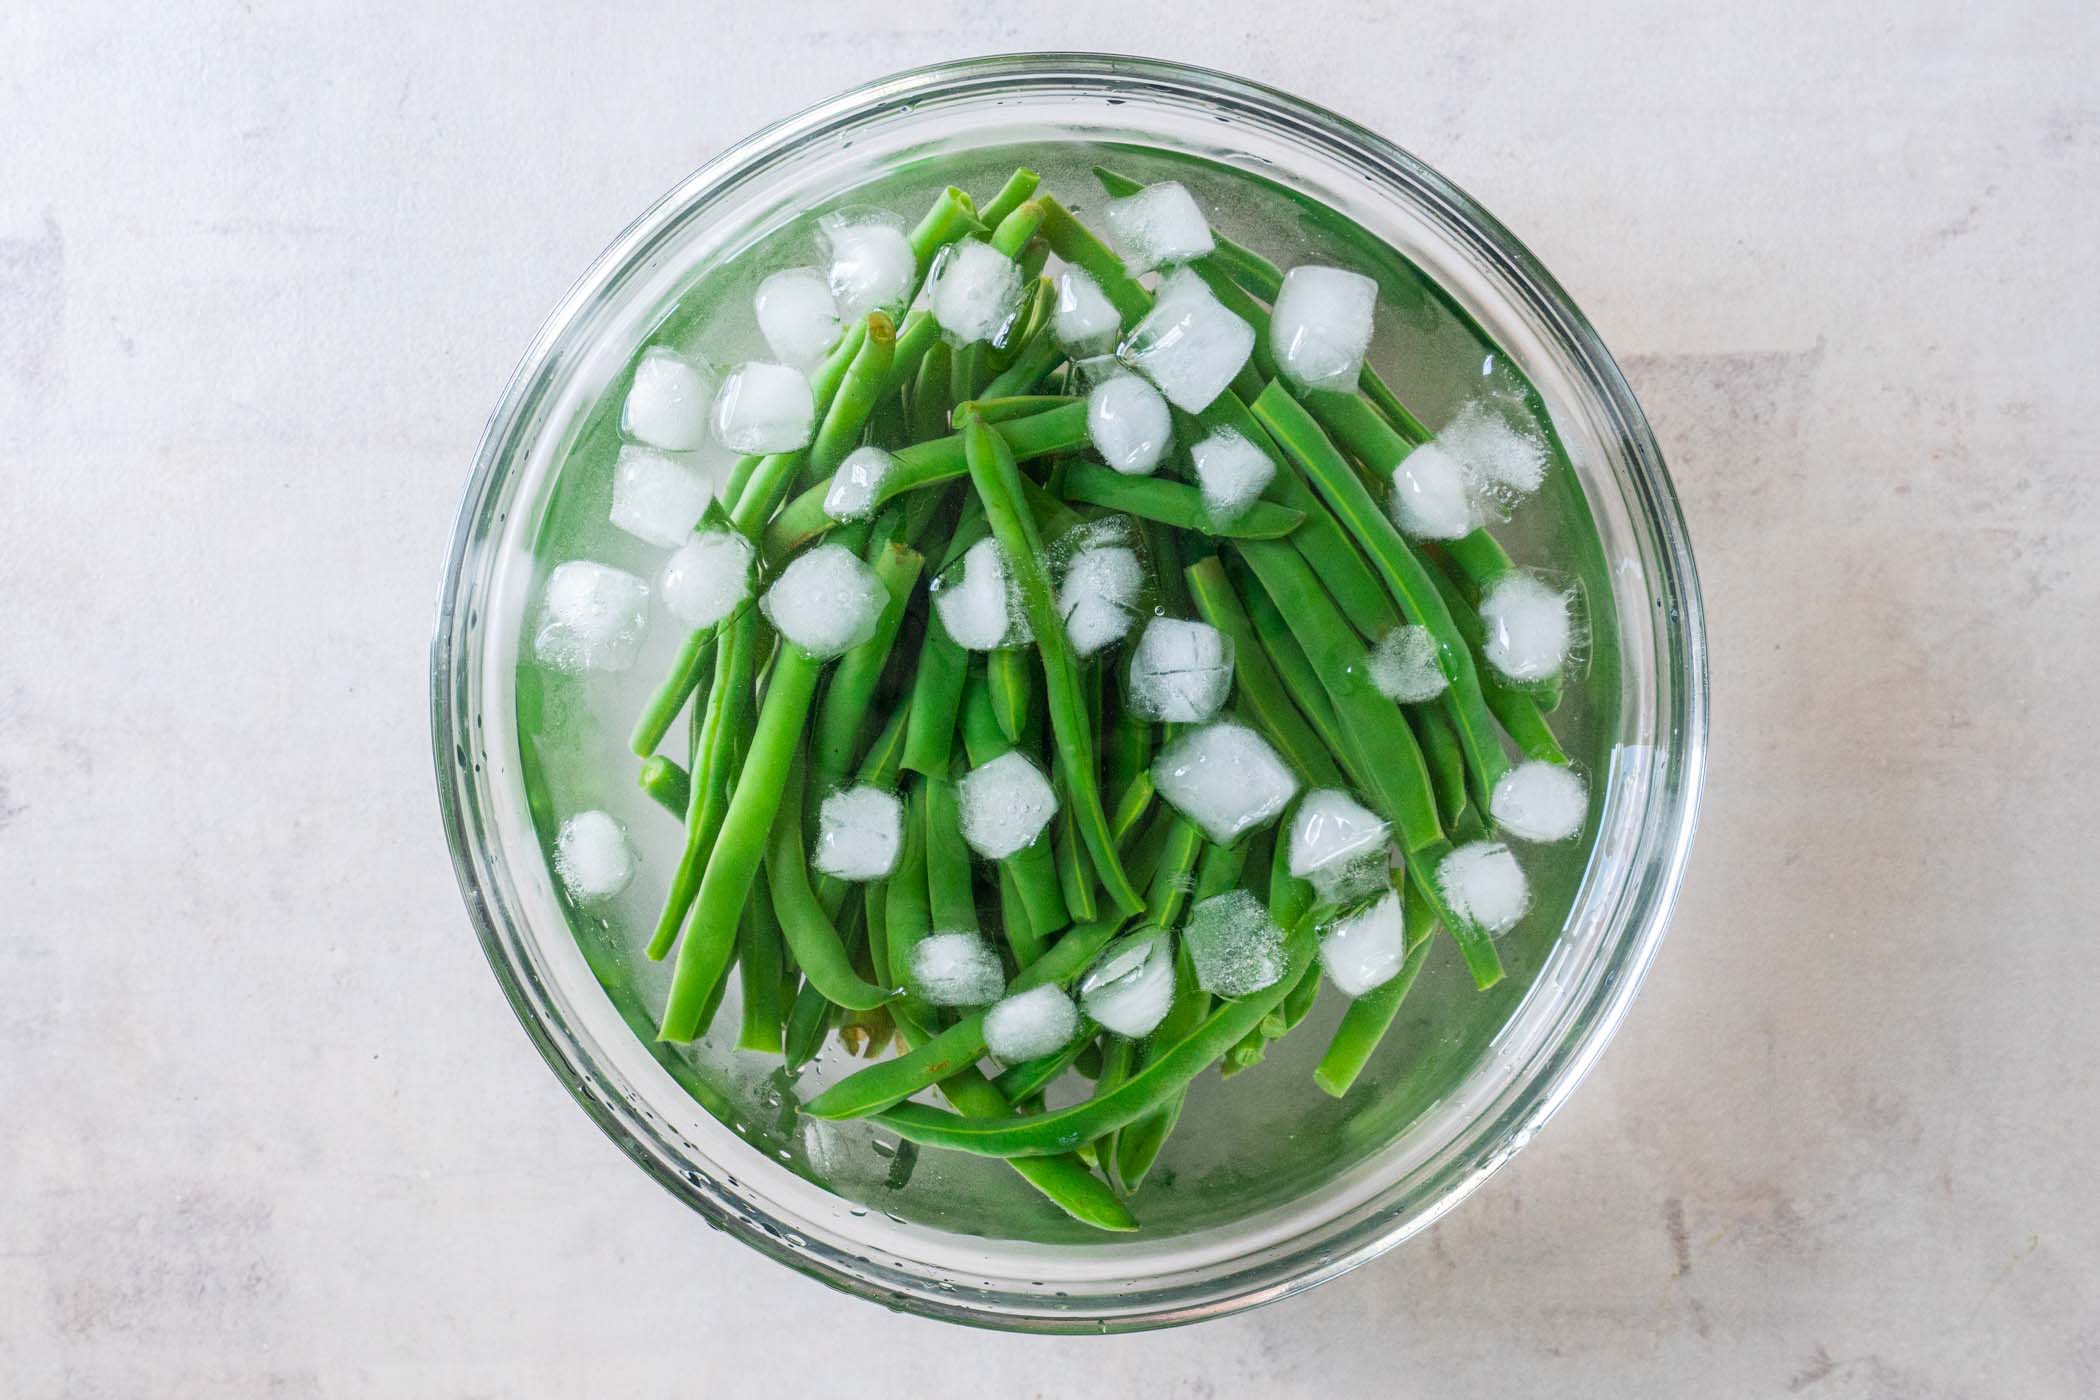 Blanched green beans in a bowl of ice water.